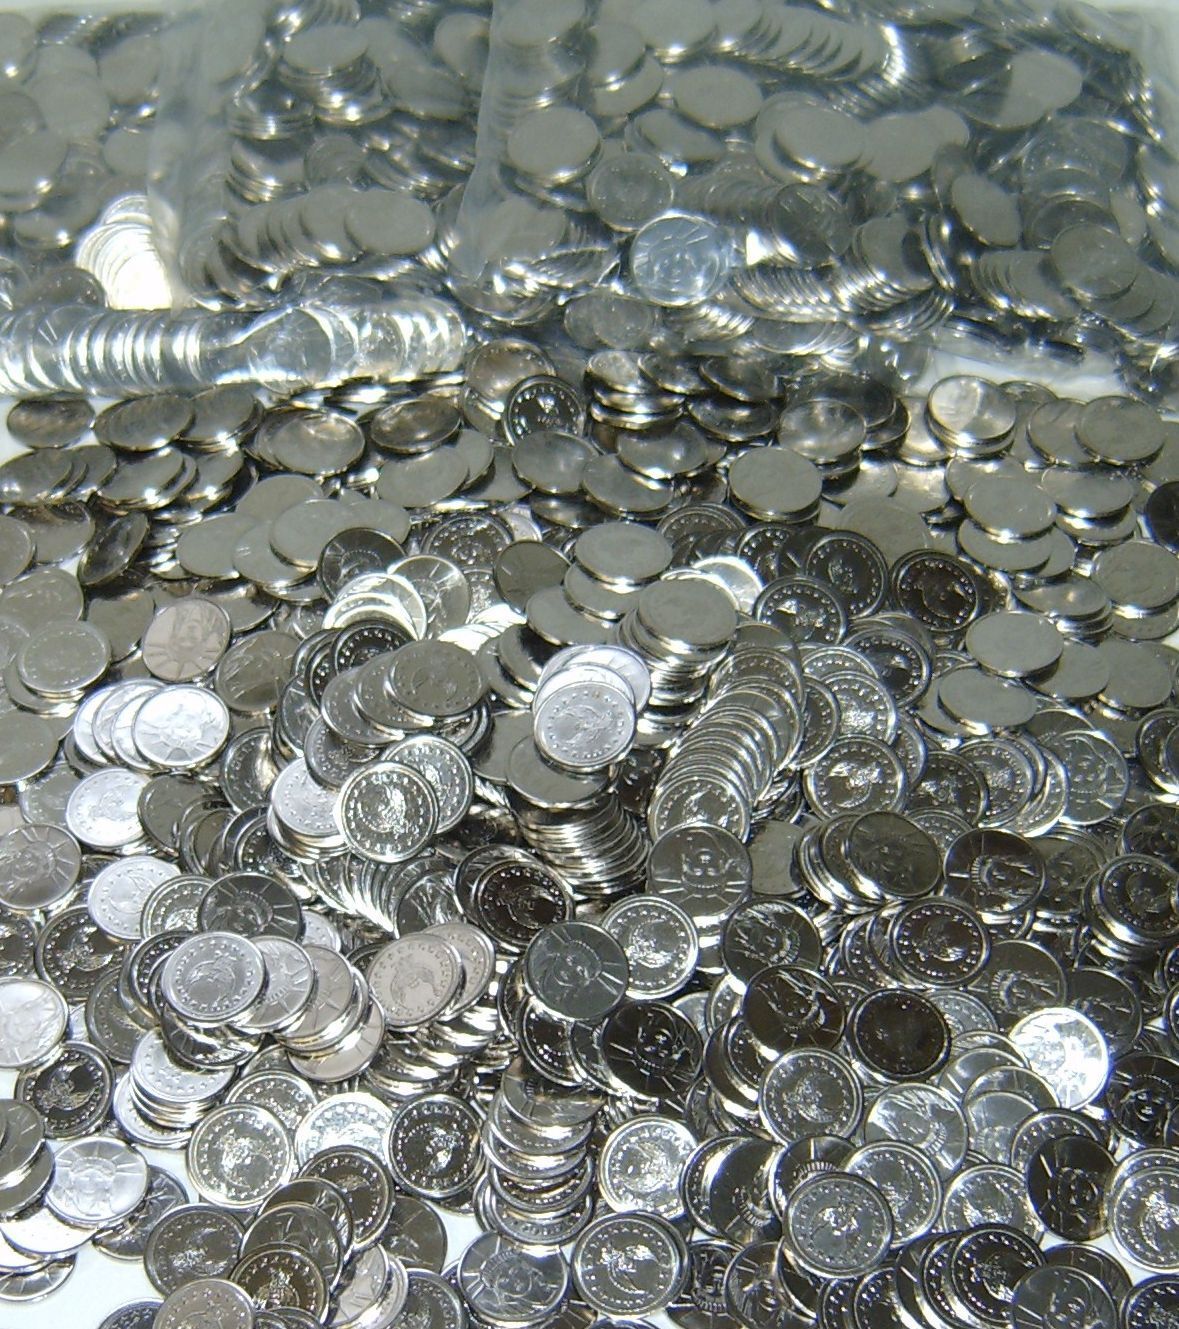 100 STAINLESS LIBERTY/EAGLE TOKENS FOR PACHISLO SKILL SLOT MACHINES - BRAND NEW